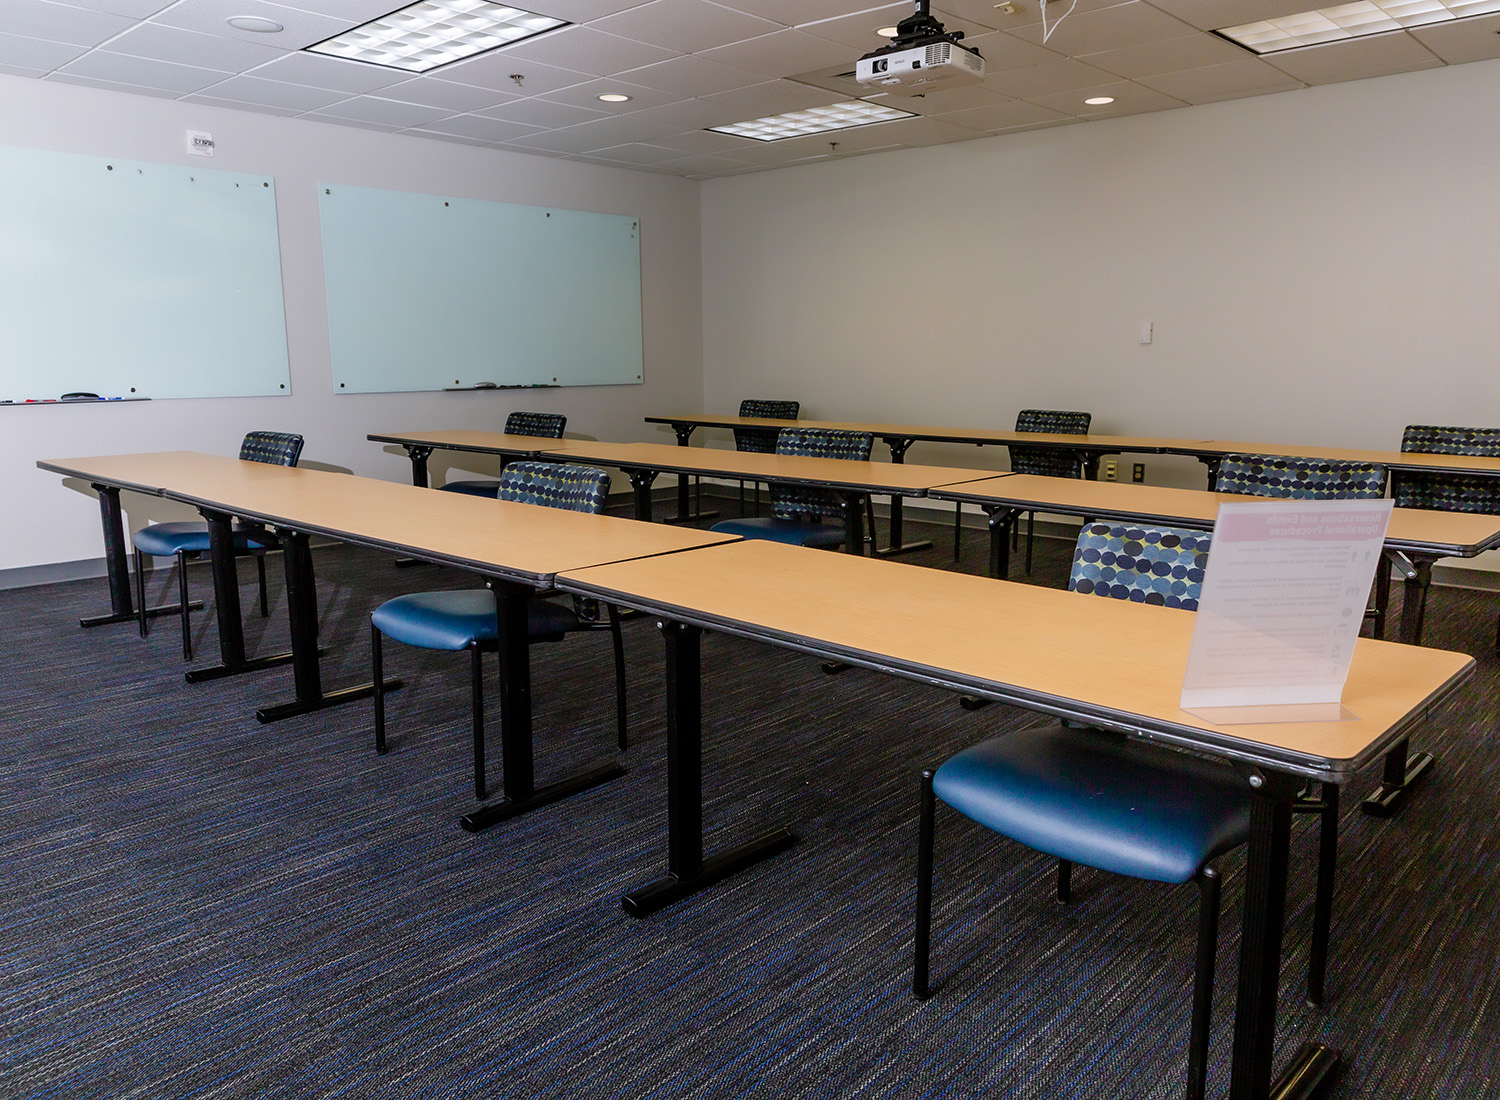 Meeting Room 302 facing the back of the room showcasing long tables and spaced seating along with two white boards